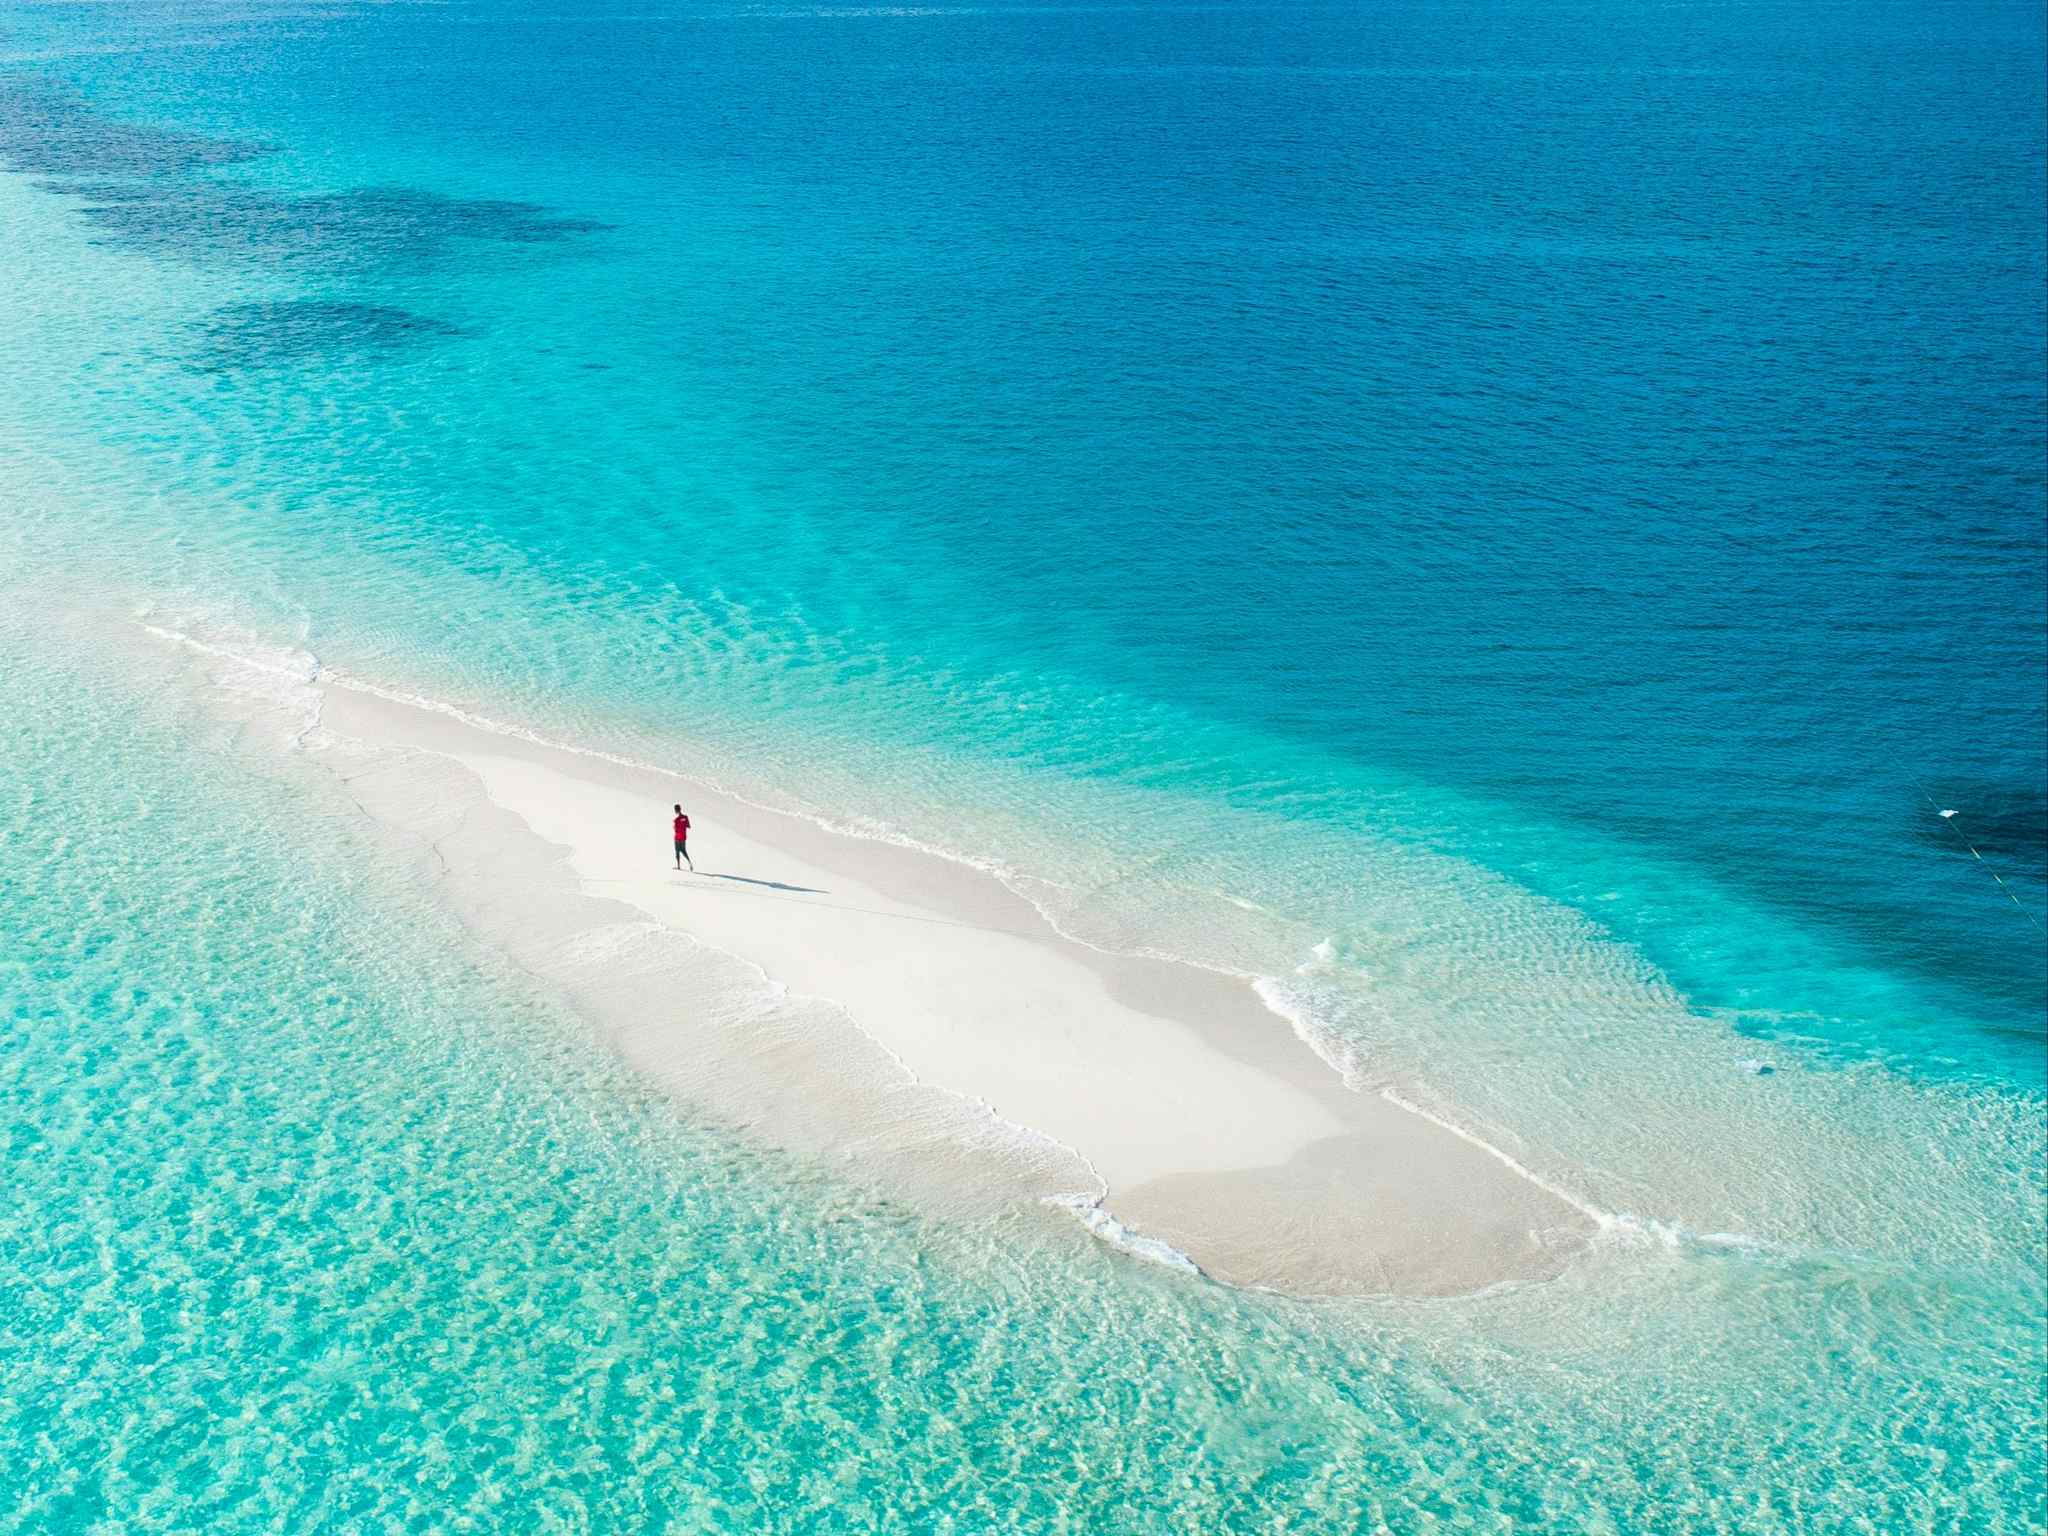 Sandbank and turquoise water in the Maldives.